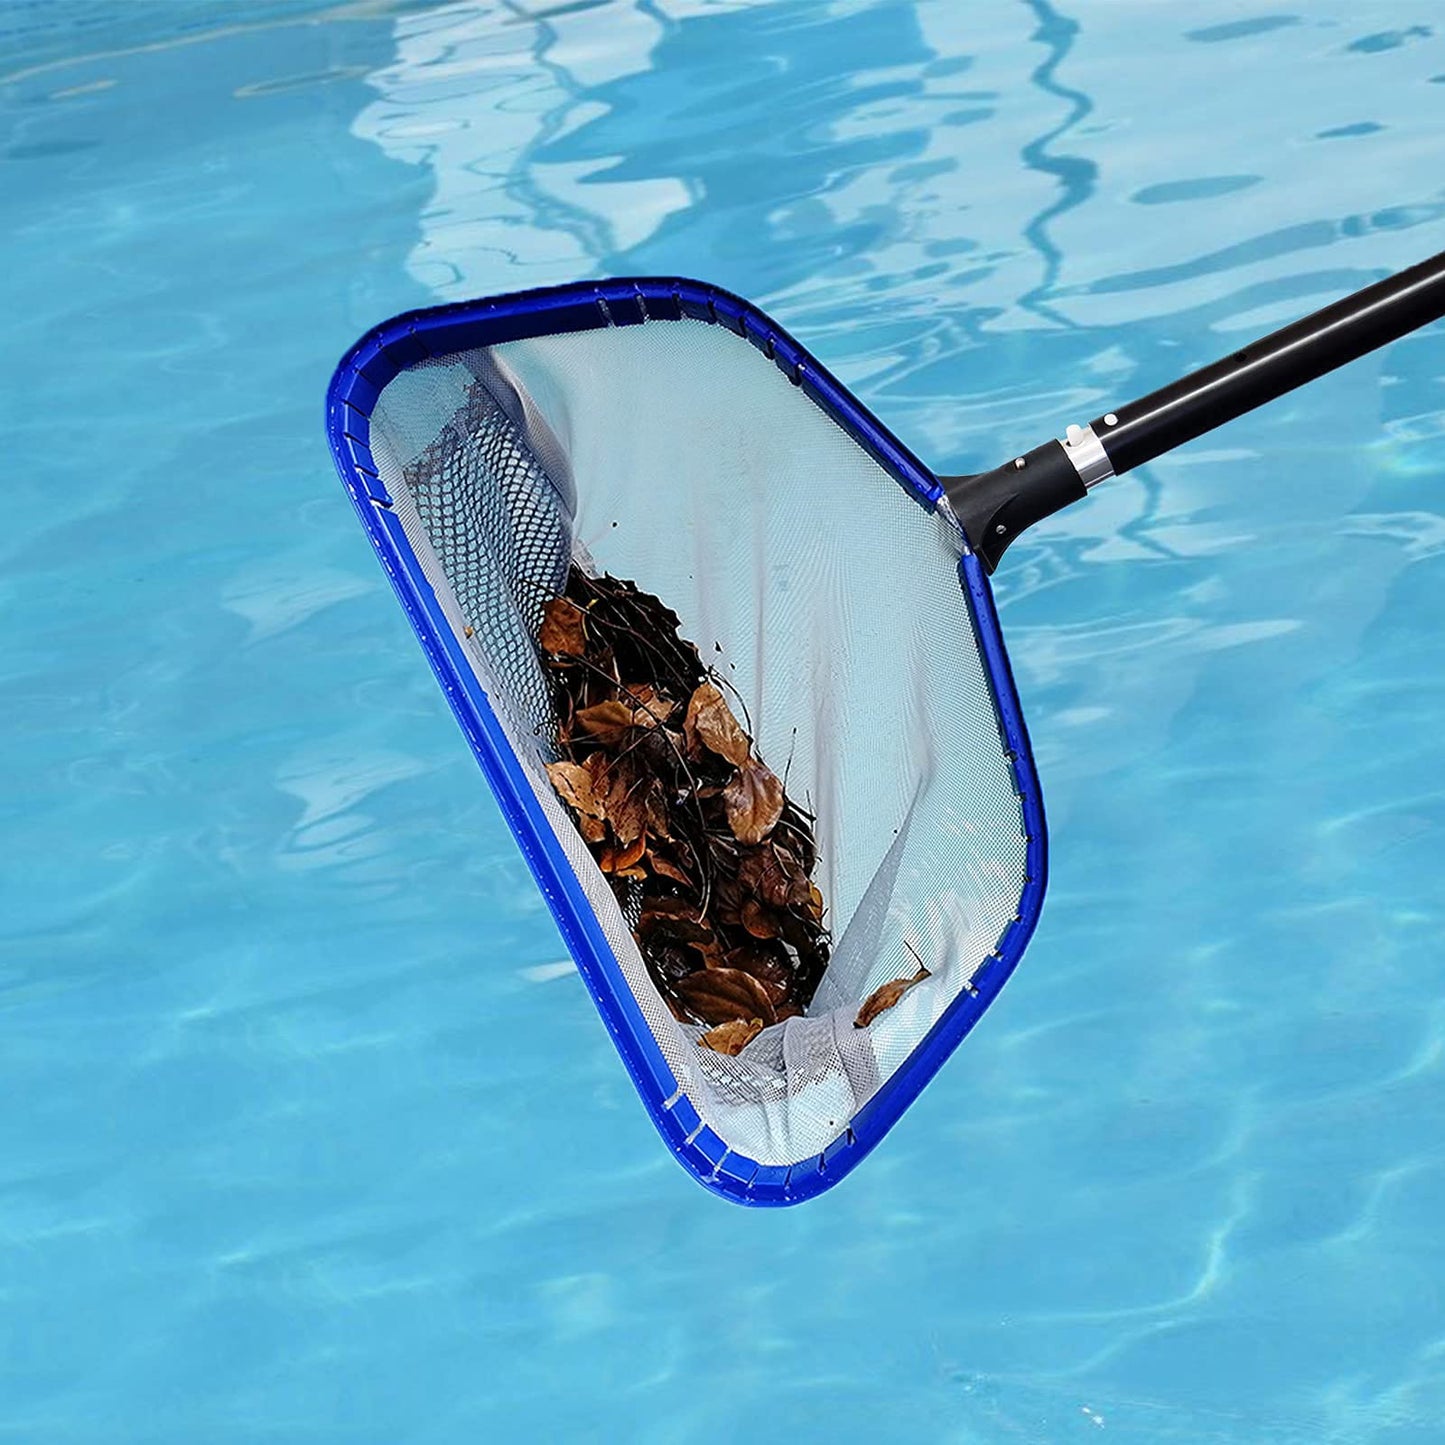 POOLWHALE Pool Leaf Rake with Double Layer Deep-Bag, Professional Skimmer Heavy Duty Mesh Net, Commercial Size(Plastic Tab at The Bottom for Assisting When You Empty The Net) Pool Rake